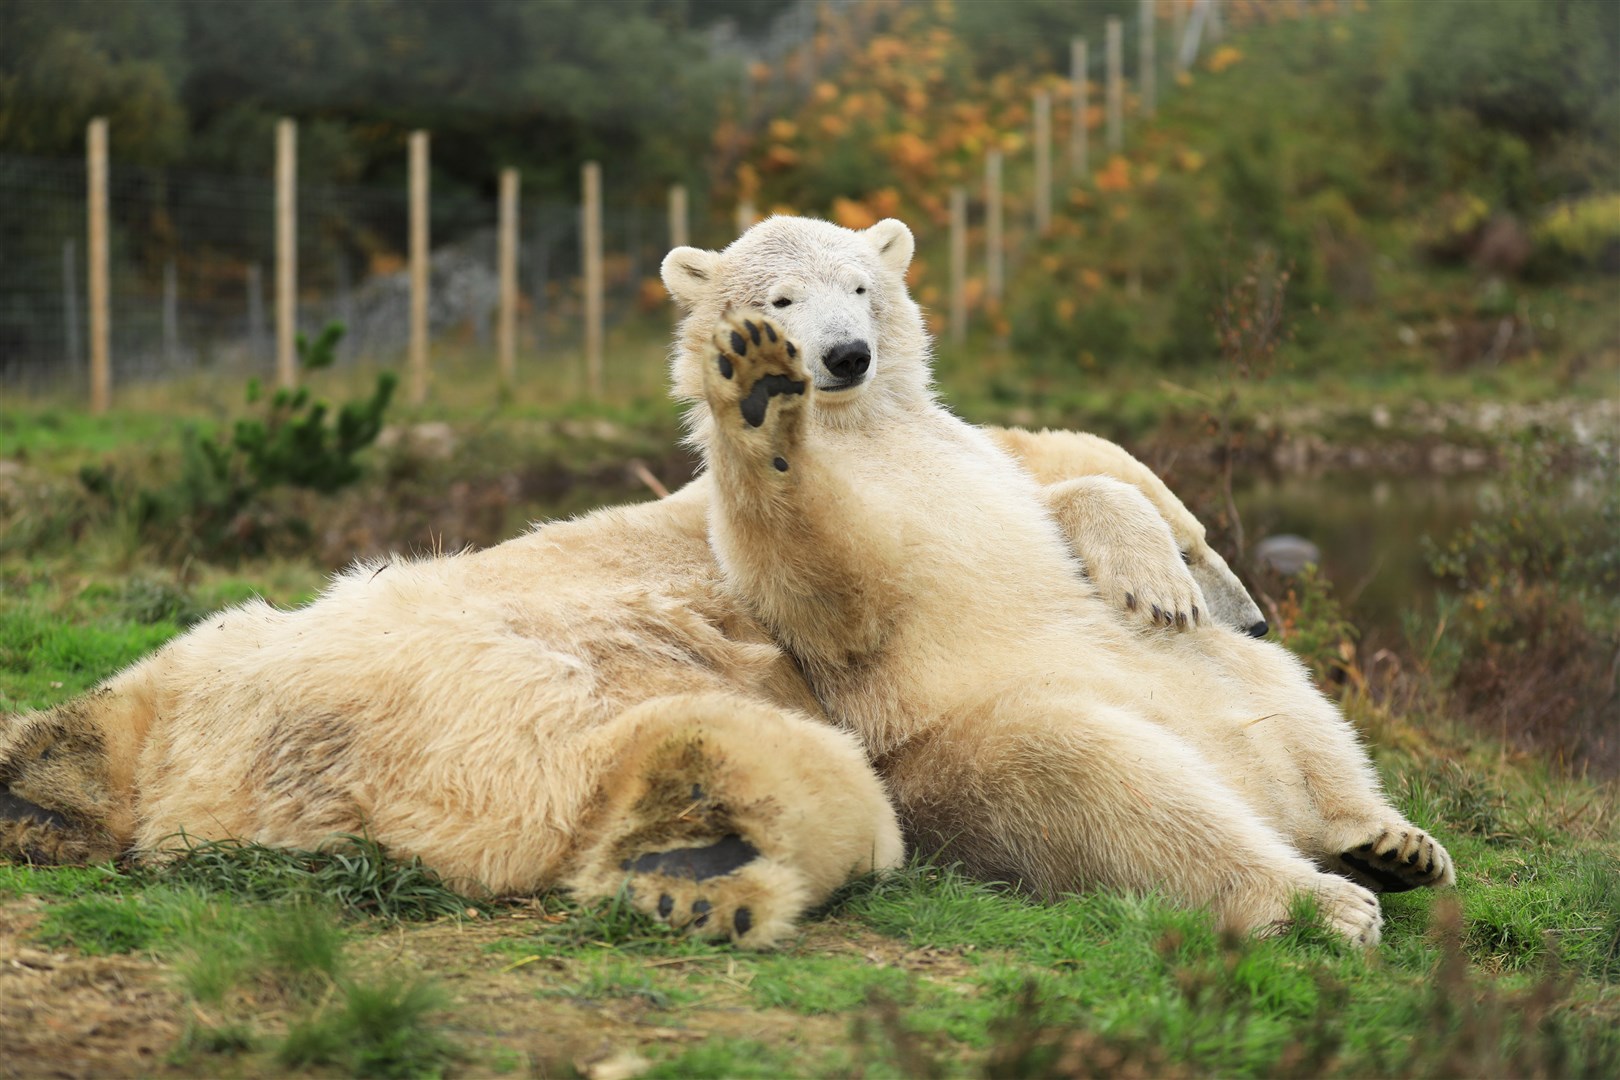 Hamish the Polar Bear alongside his mum Victoria at the Highland Wildlife Park, which is five miles south of Aviemore on the A9. Picture: RZSS